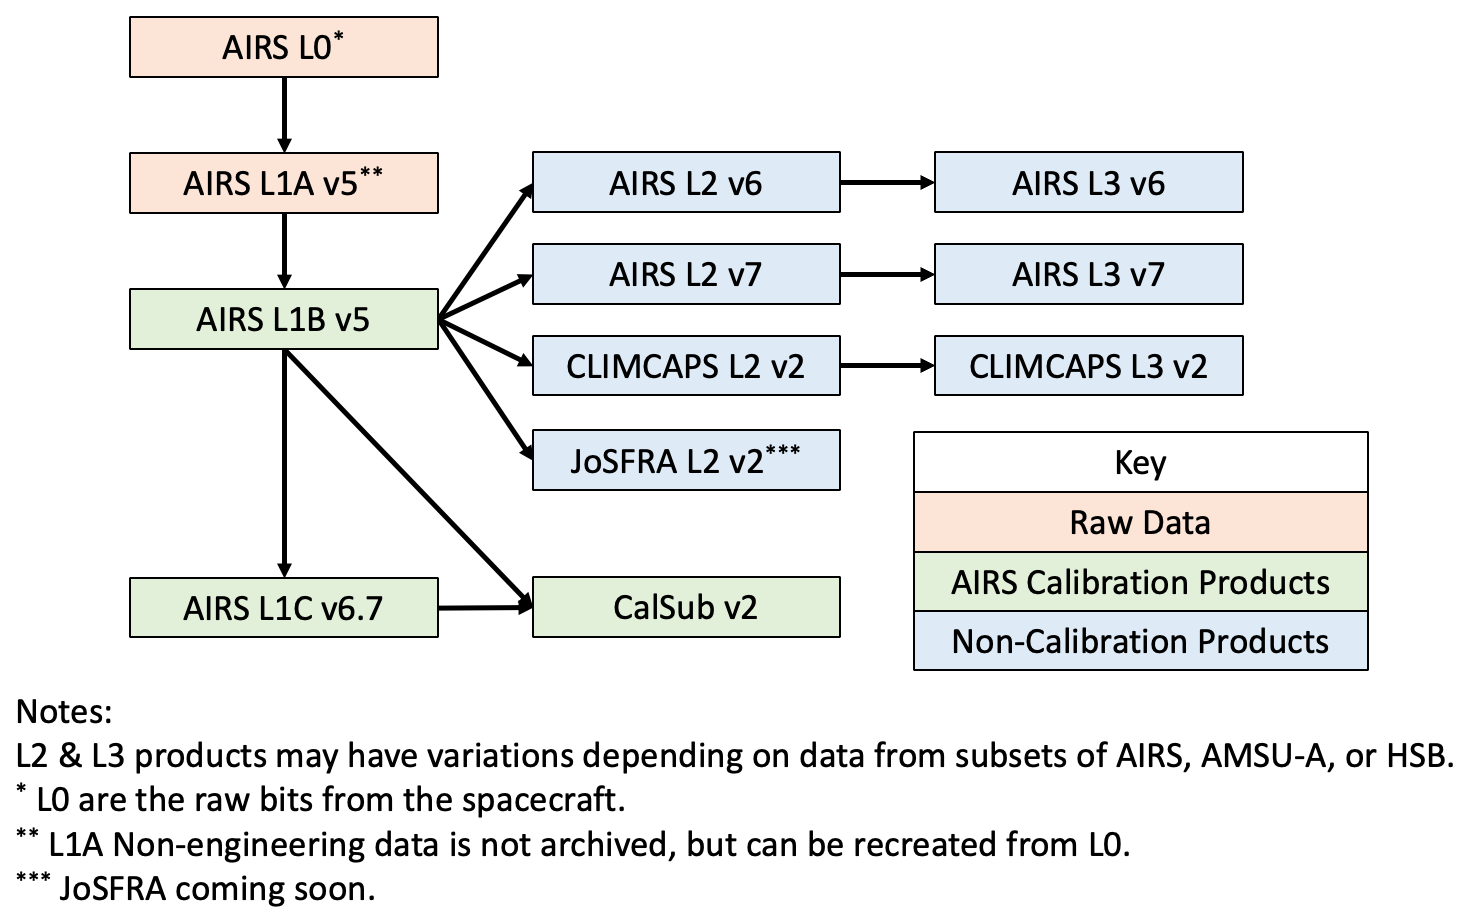 AIRS data products figure, showing data flow relationships L2 &amp; L3 products may have variations depending on data from subsets of AIRS, AMSU-A, or HSB. AIRS L0 (L0 are the raw bits from the spacecraft.) AIRS L0 -&gt; AIRS L1A v5 (L1A Non-engineering data is not archived, but can be recreated from L0.) AIRS L1A v5 -&gt; AIRS L1B v5 AIRS L1B v5 -&gt; AIRS L1C v6.7 AIRS L1C v6.7 -&gt; CHIRP v2 AIRS L1B v5 -&gt; AIRS L2/L3 v6 AIRS L1B v5 -&gt; AIRS L2/L3 v7 AIRS L1B v5 -&gt; CLIMCAPS L2/L3 v2 AIRS L1B v5 -&gt; JoSFRA (coming soon) AIRS L1B v5 &amp; AIRS L1C v6.7 -&gt; CalSub v2